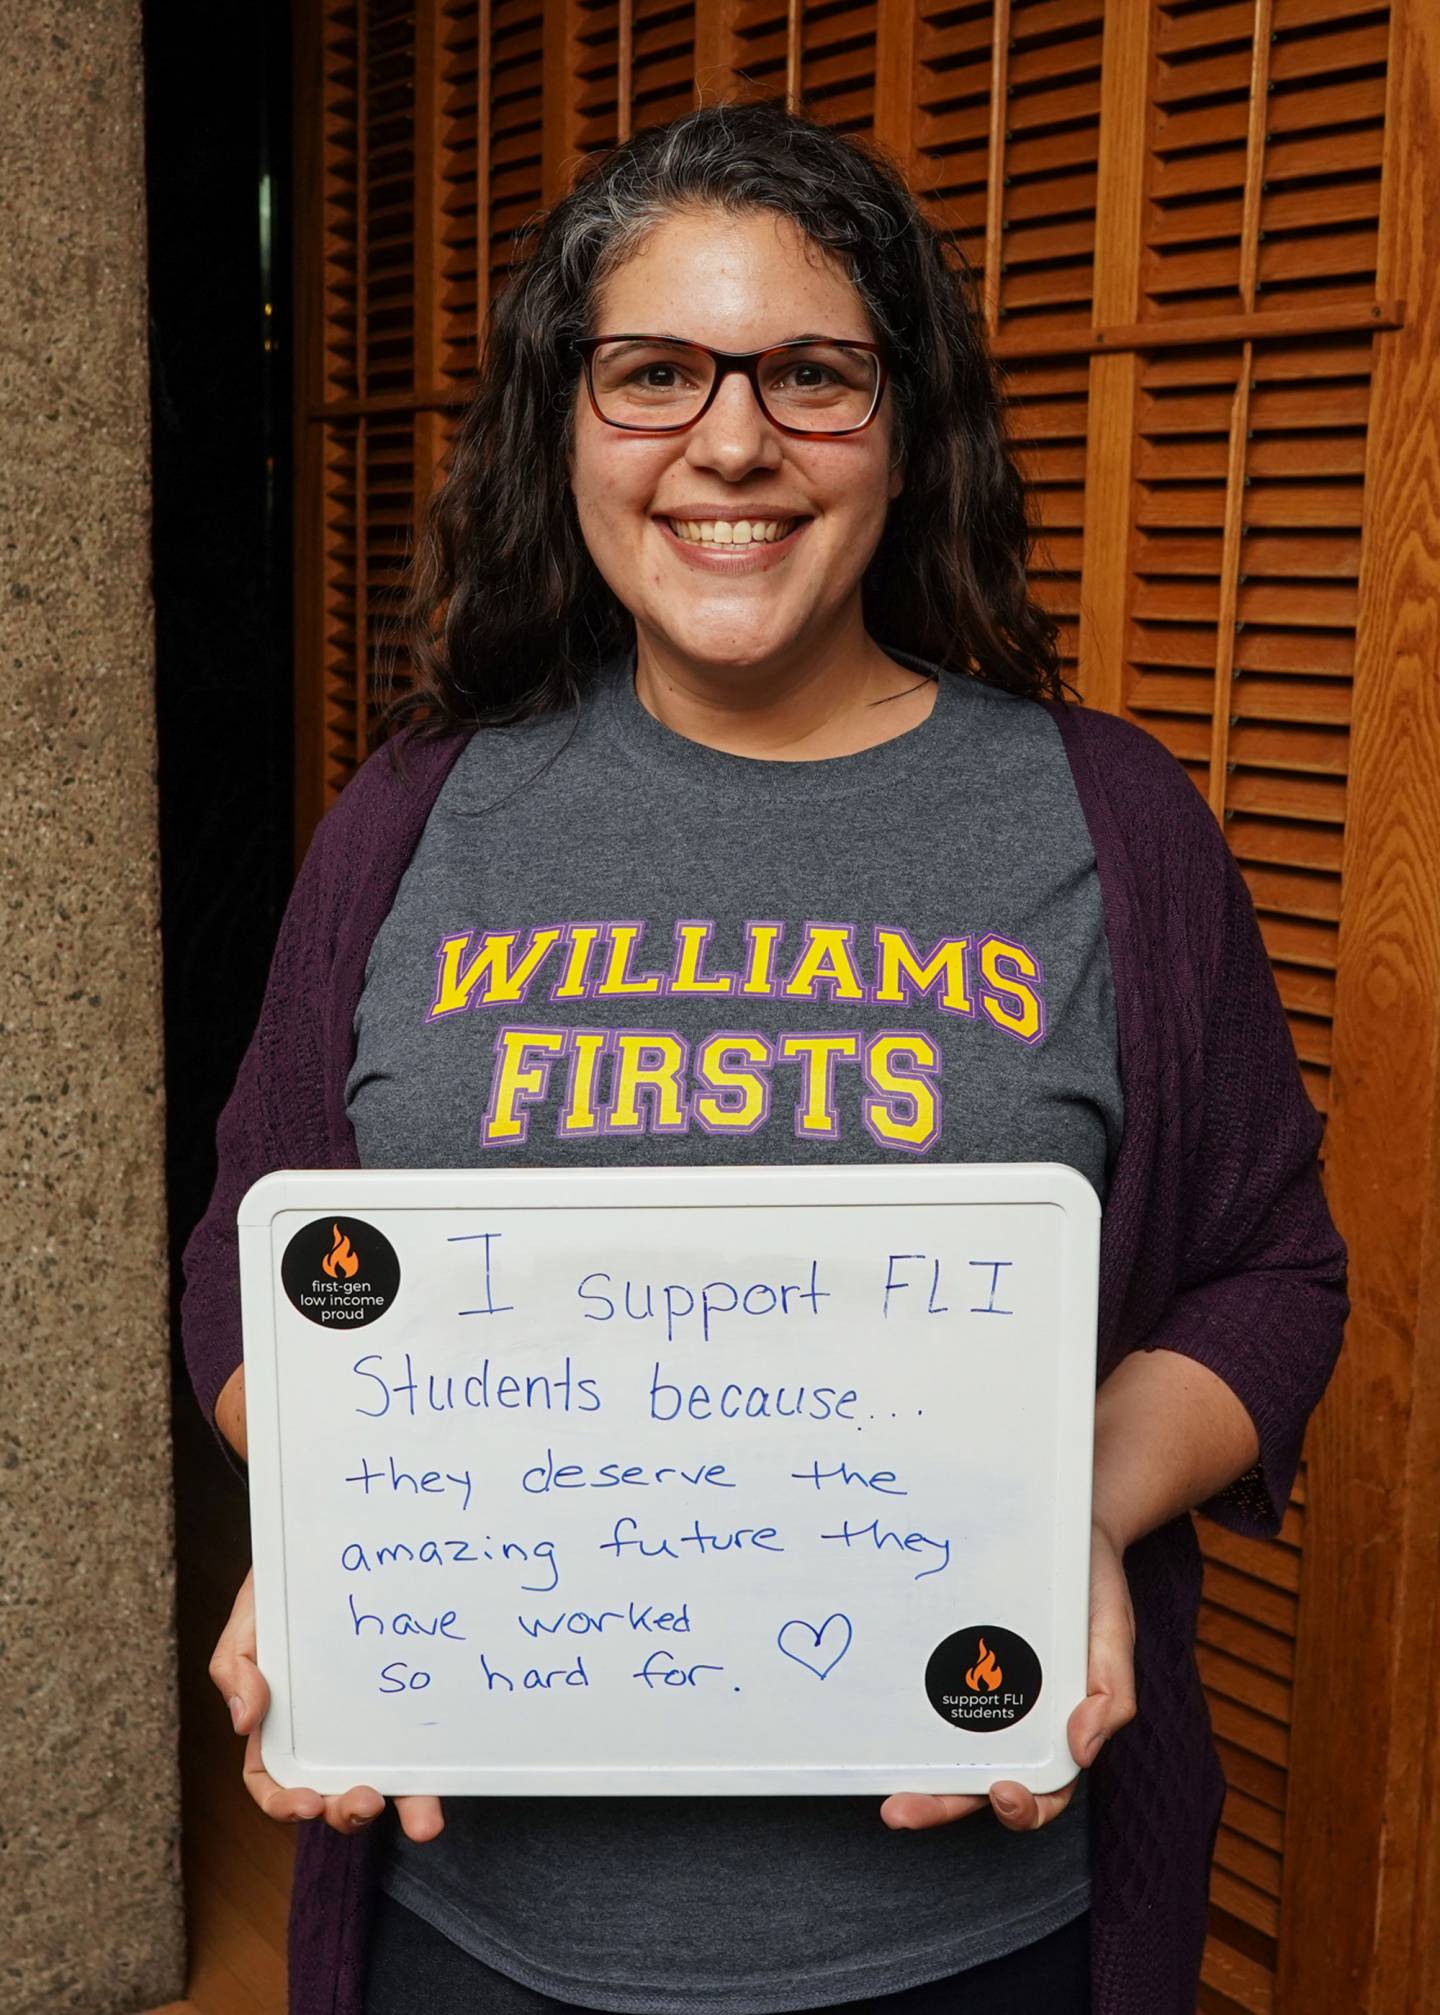 April Ruiz holding a whiteboard that says "I support FLI students because they deserve the amazing future they have worked so hard for."